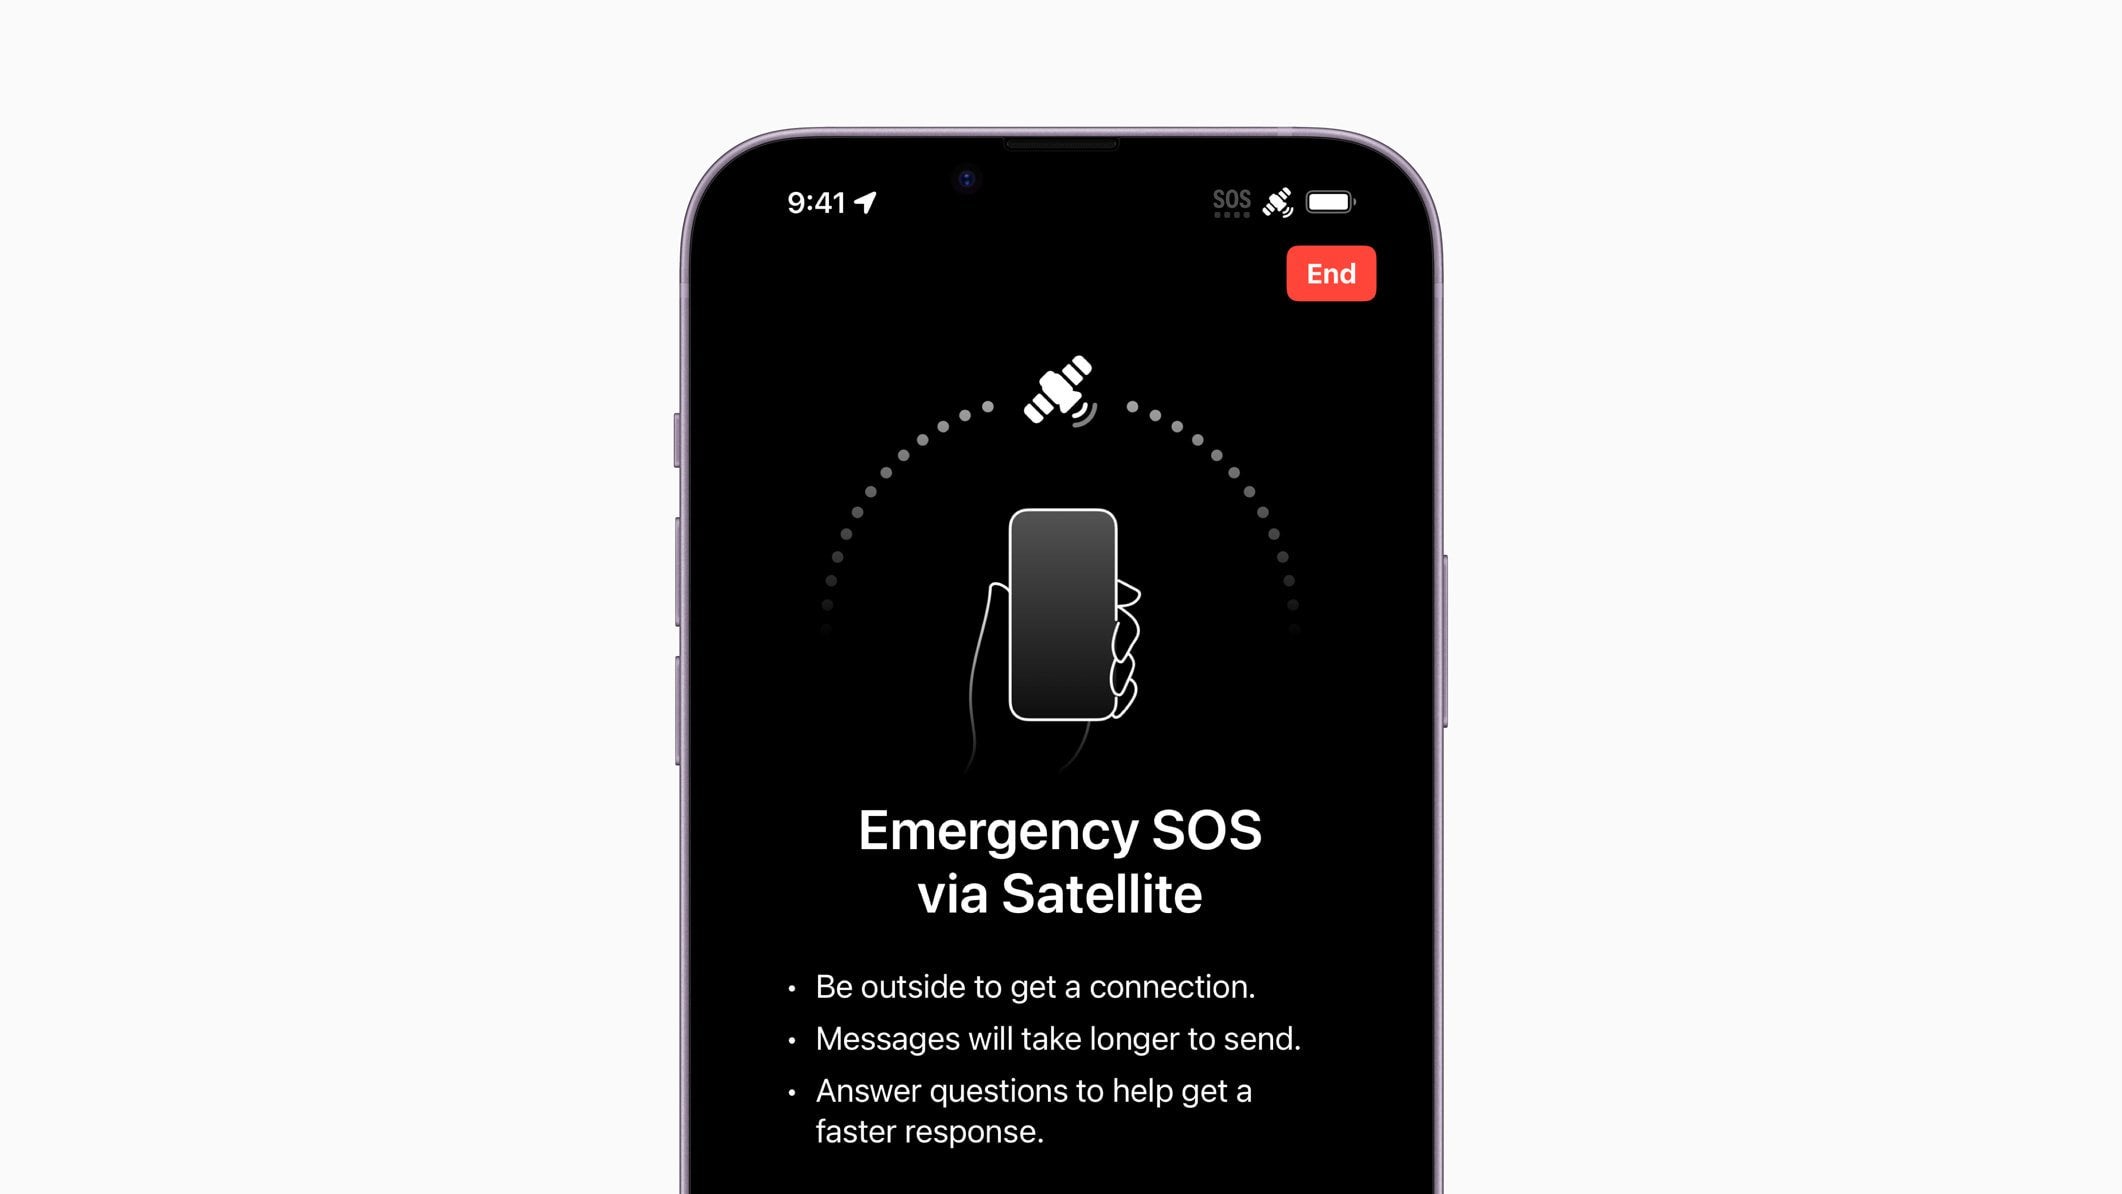 Starting today Emergency SOS is live on the iPhone 14 lineup in the US and Canada